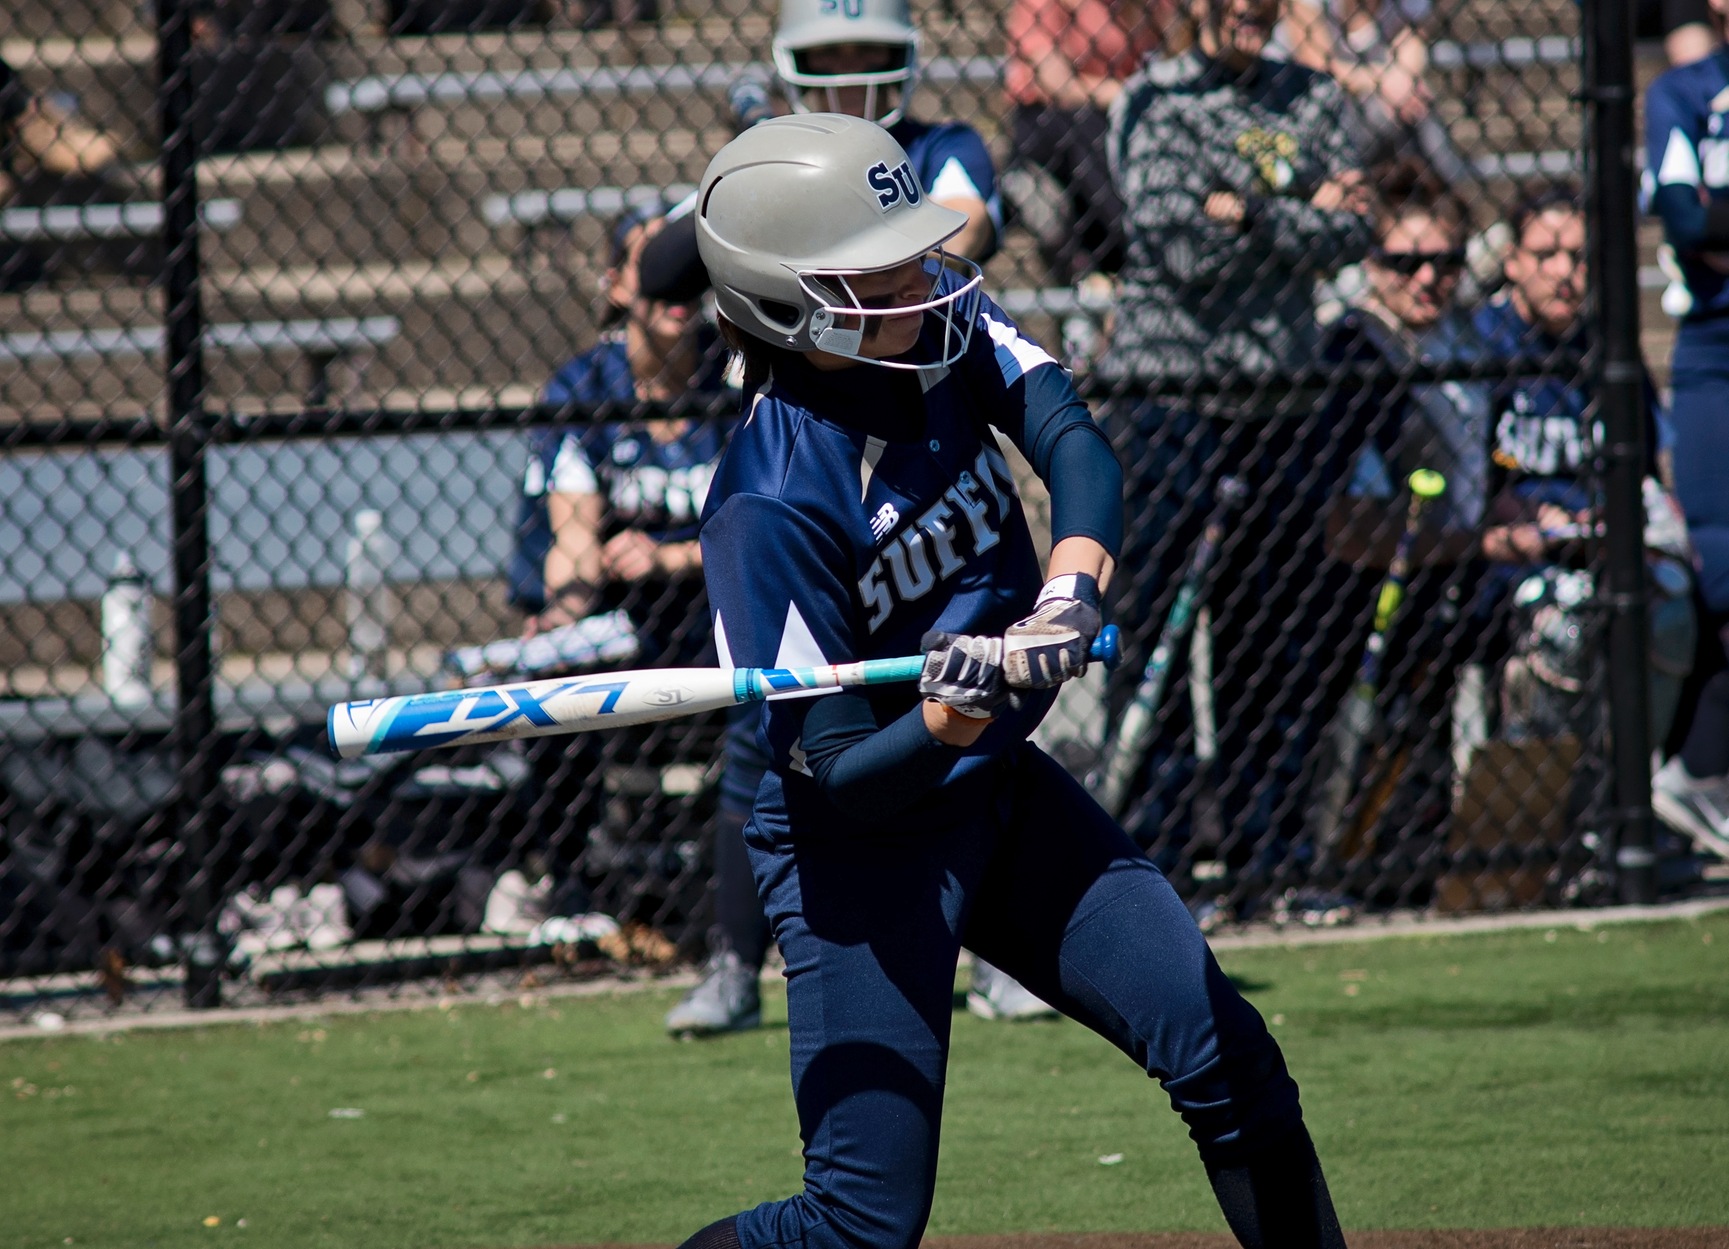 Softball Shutouts Lasell in Nightcap 5-0; Sweeps Lasers